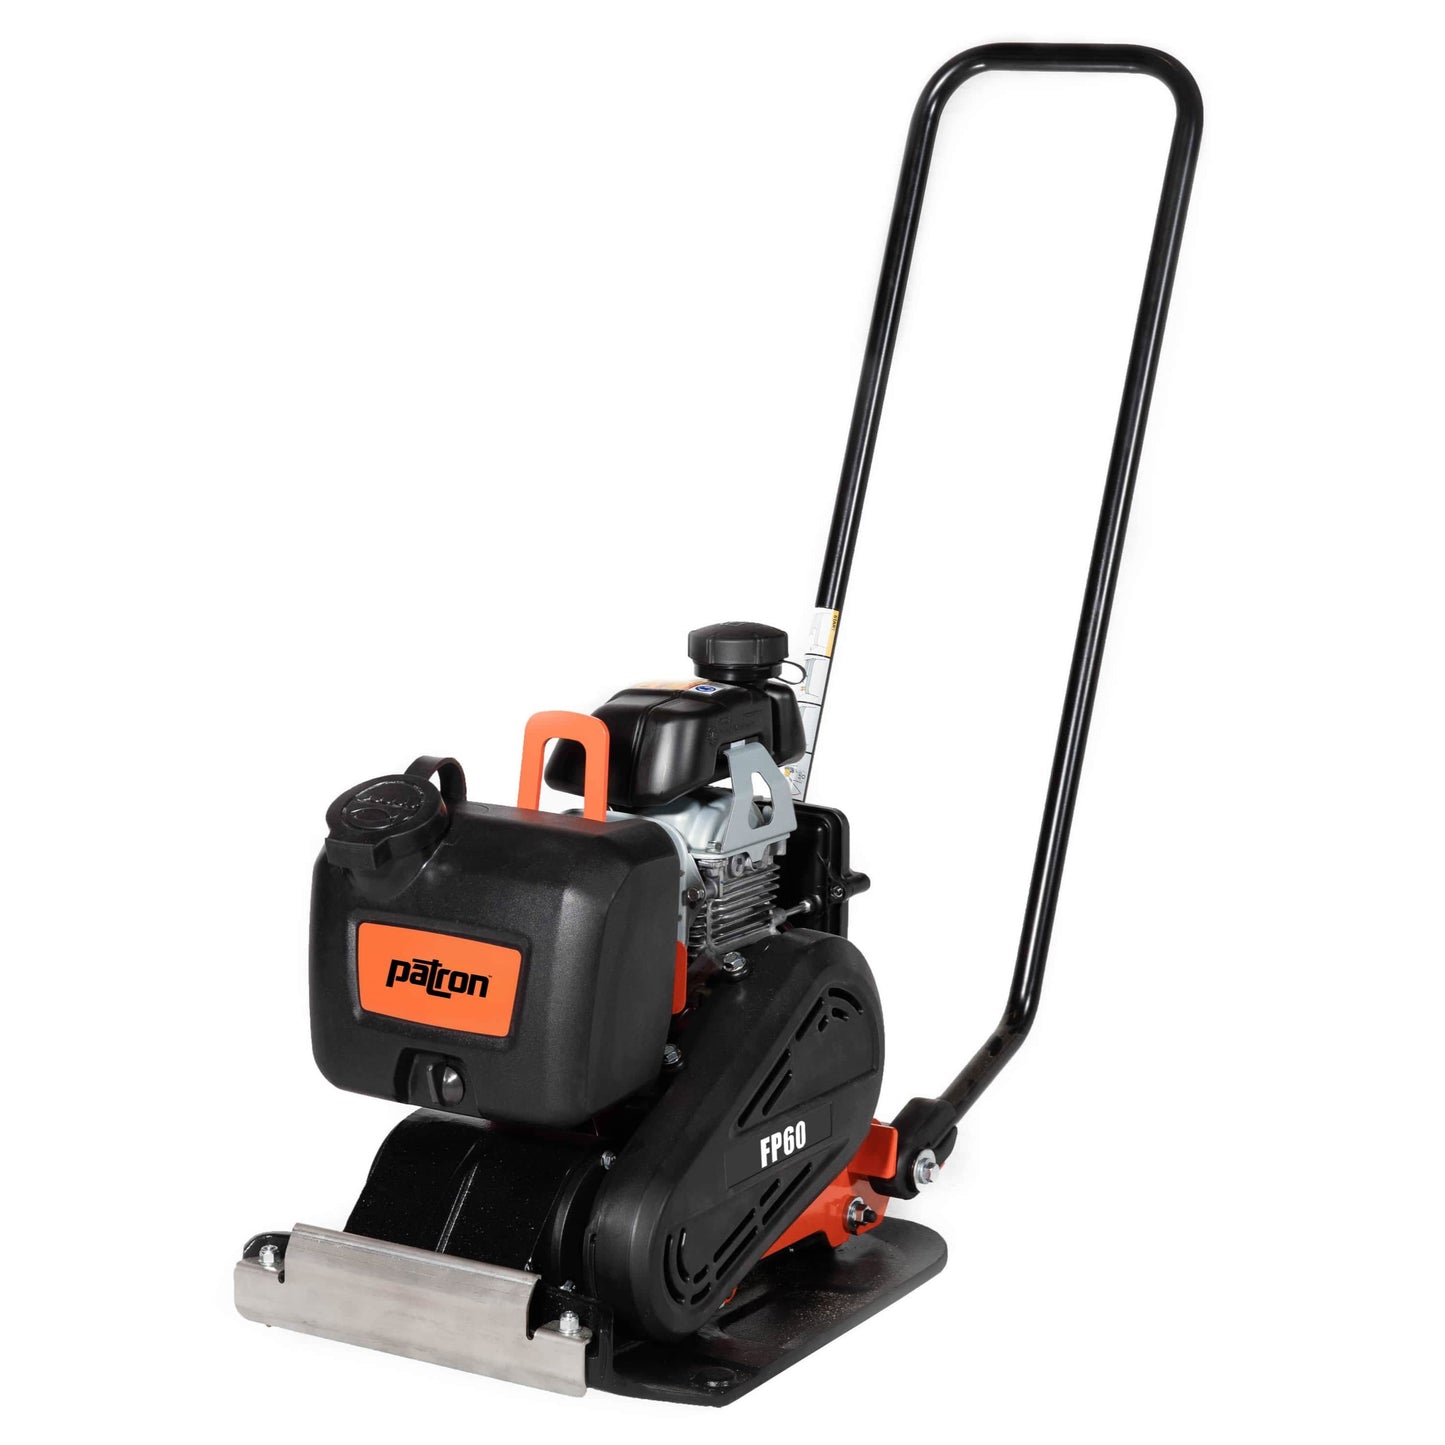 PATRON FP60 PLATE COMPACTOR, 14", 128 LBS